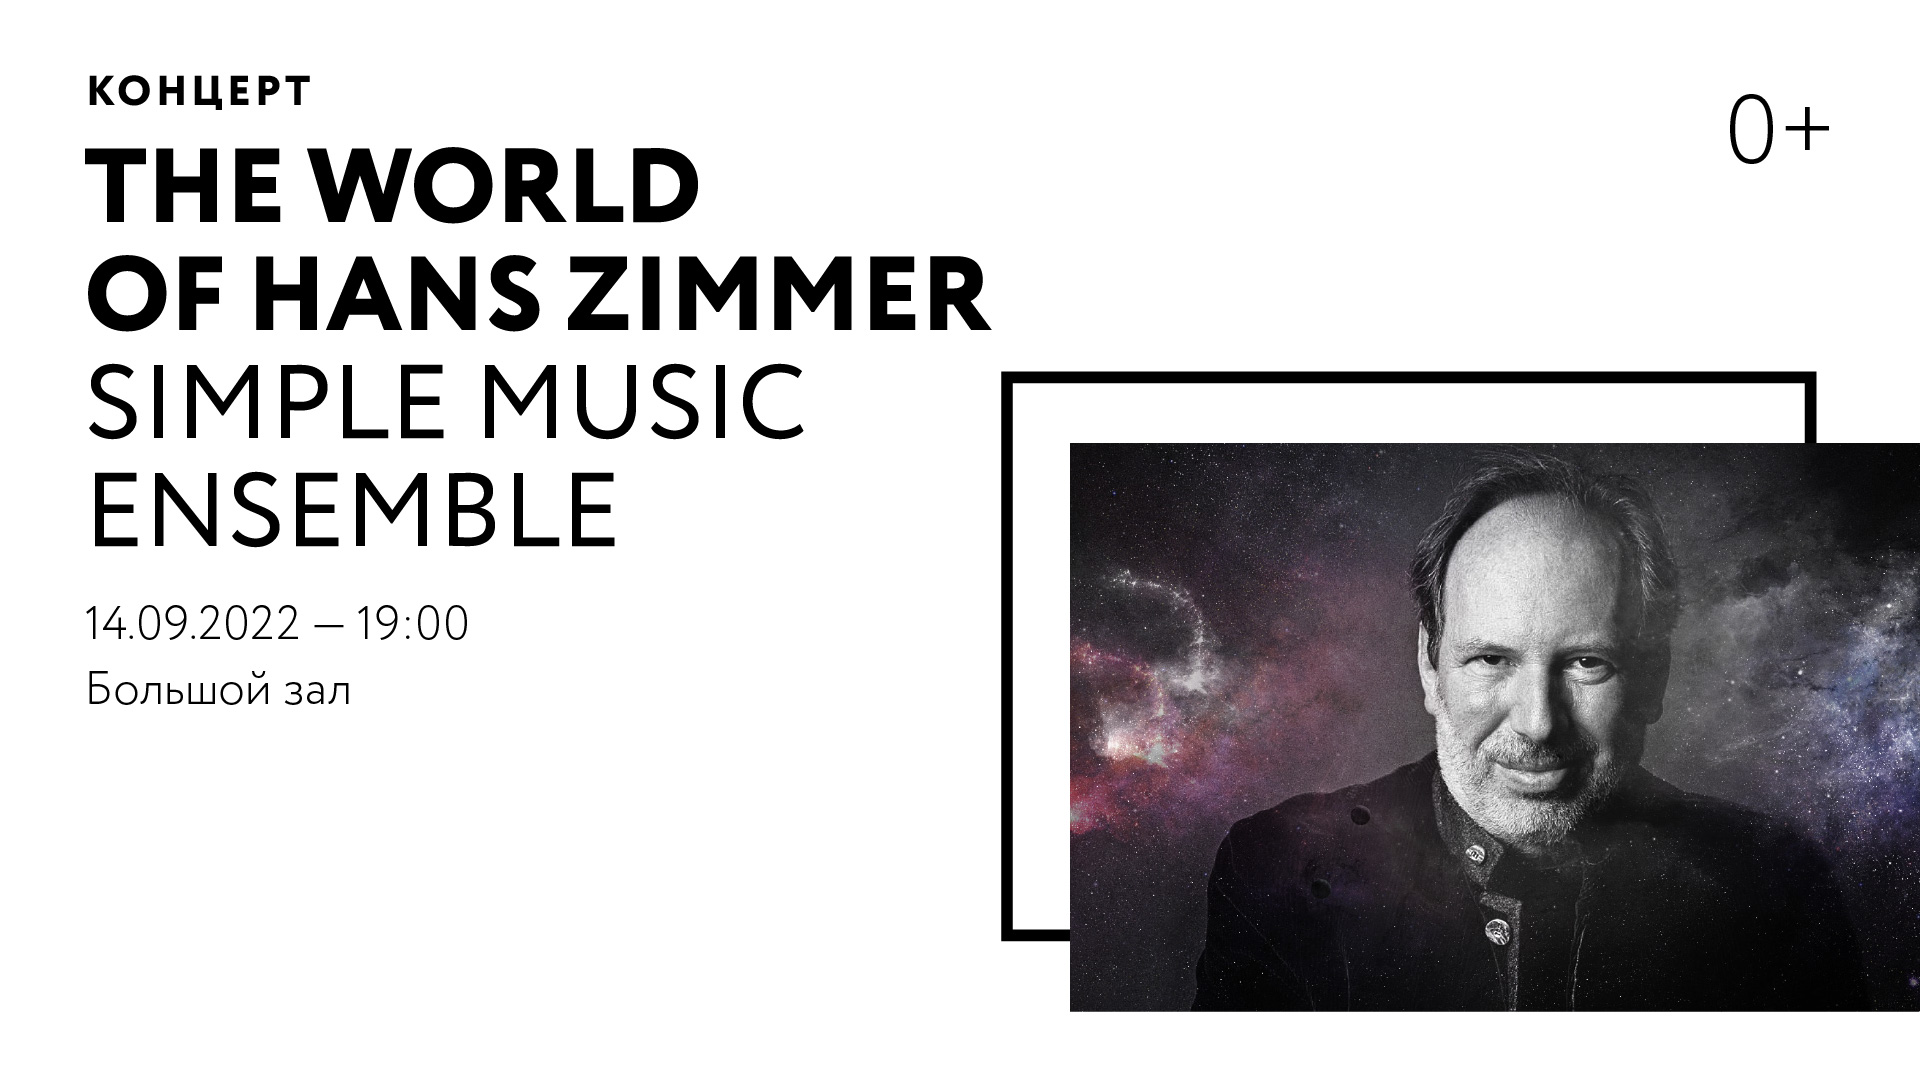 THE WORLD OF HANS ZIMMER. Simple Music Ensemble